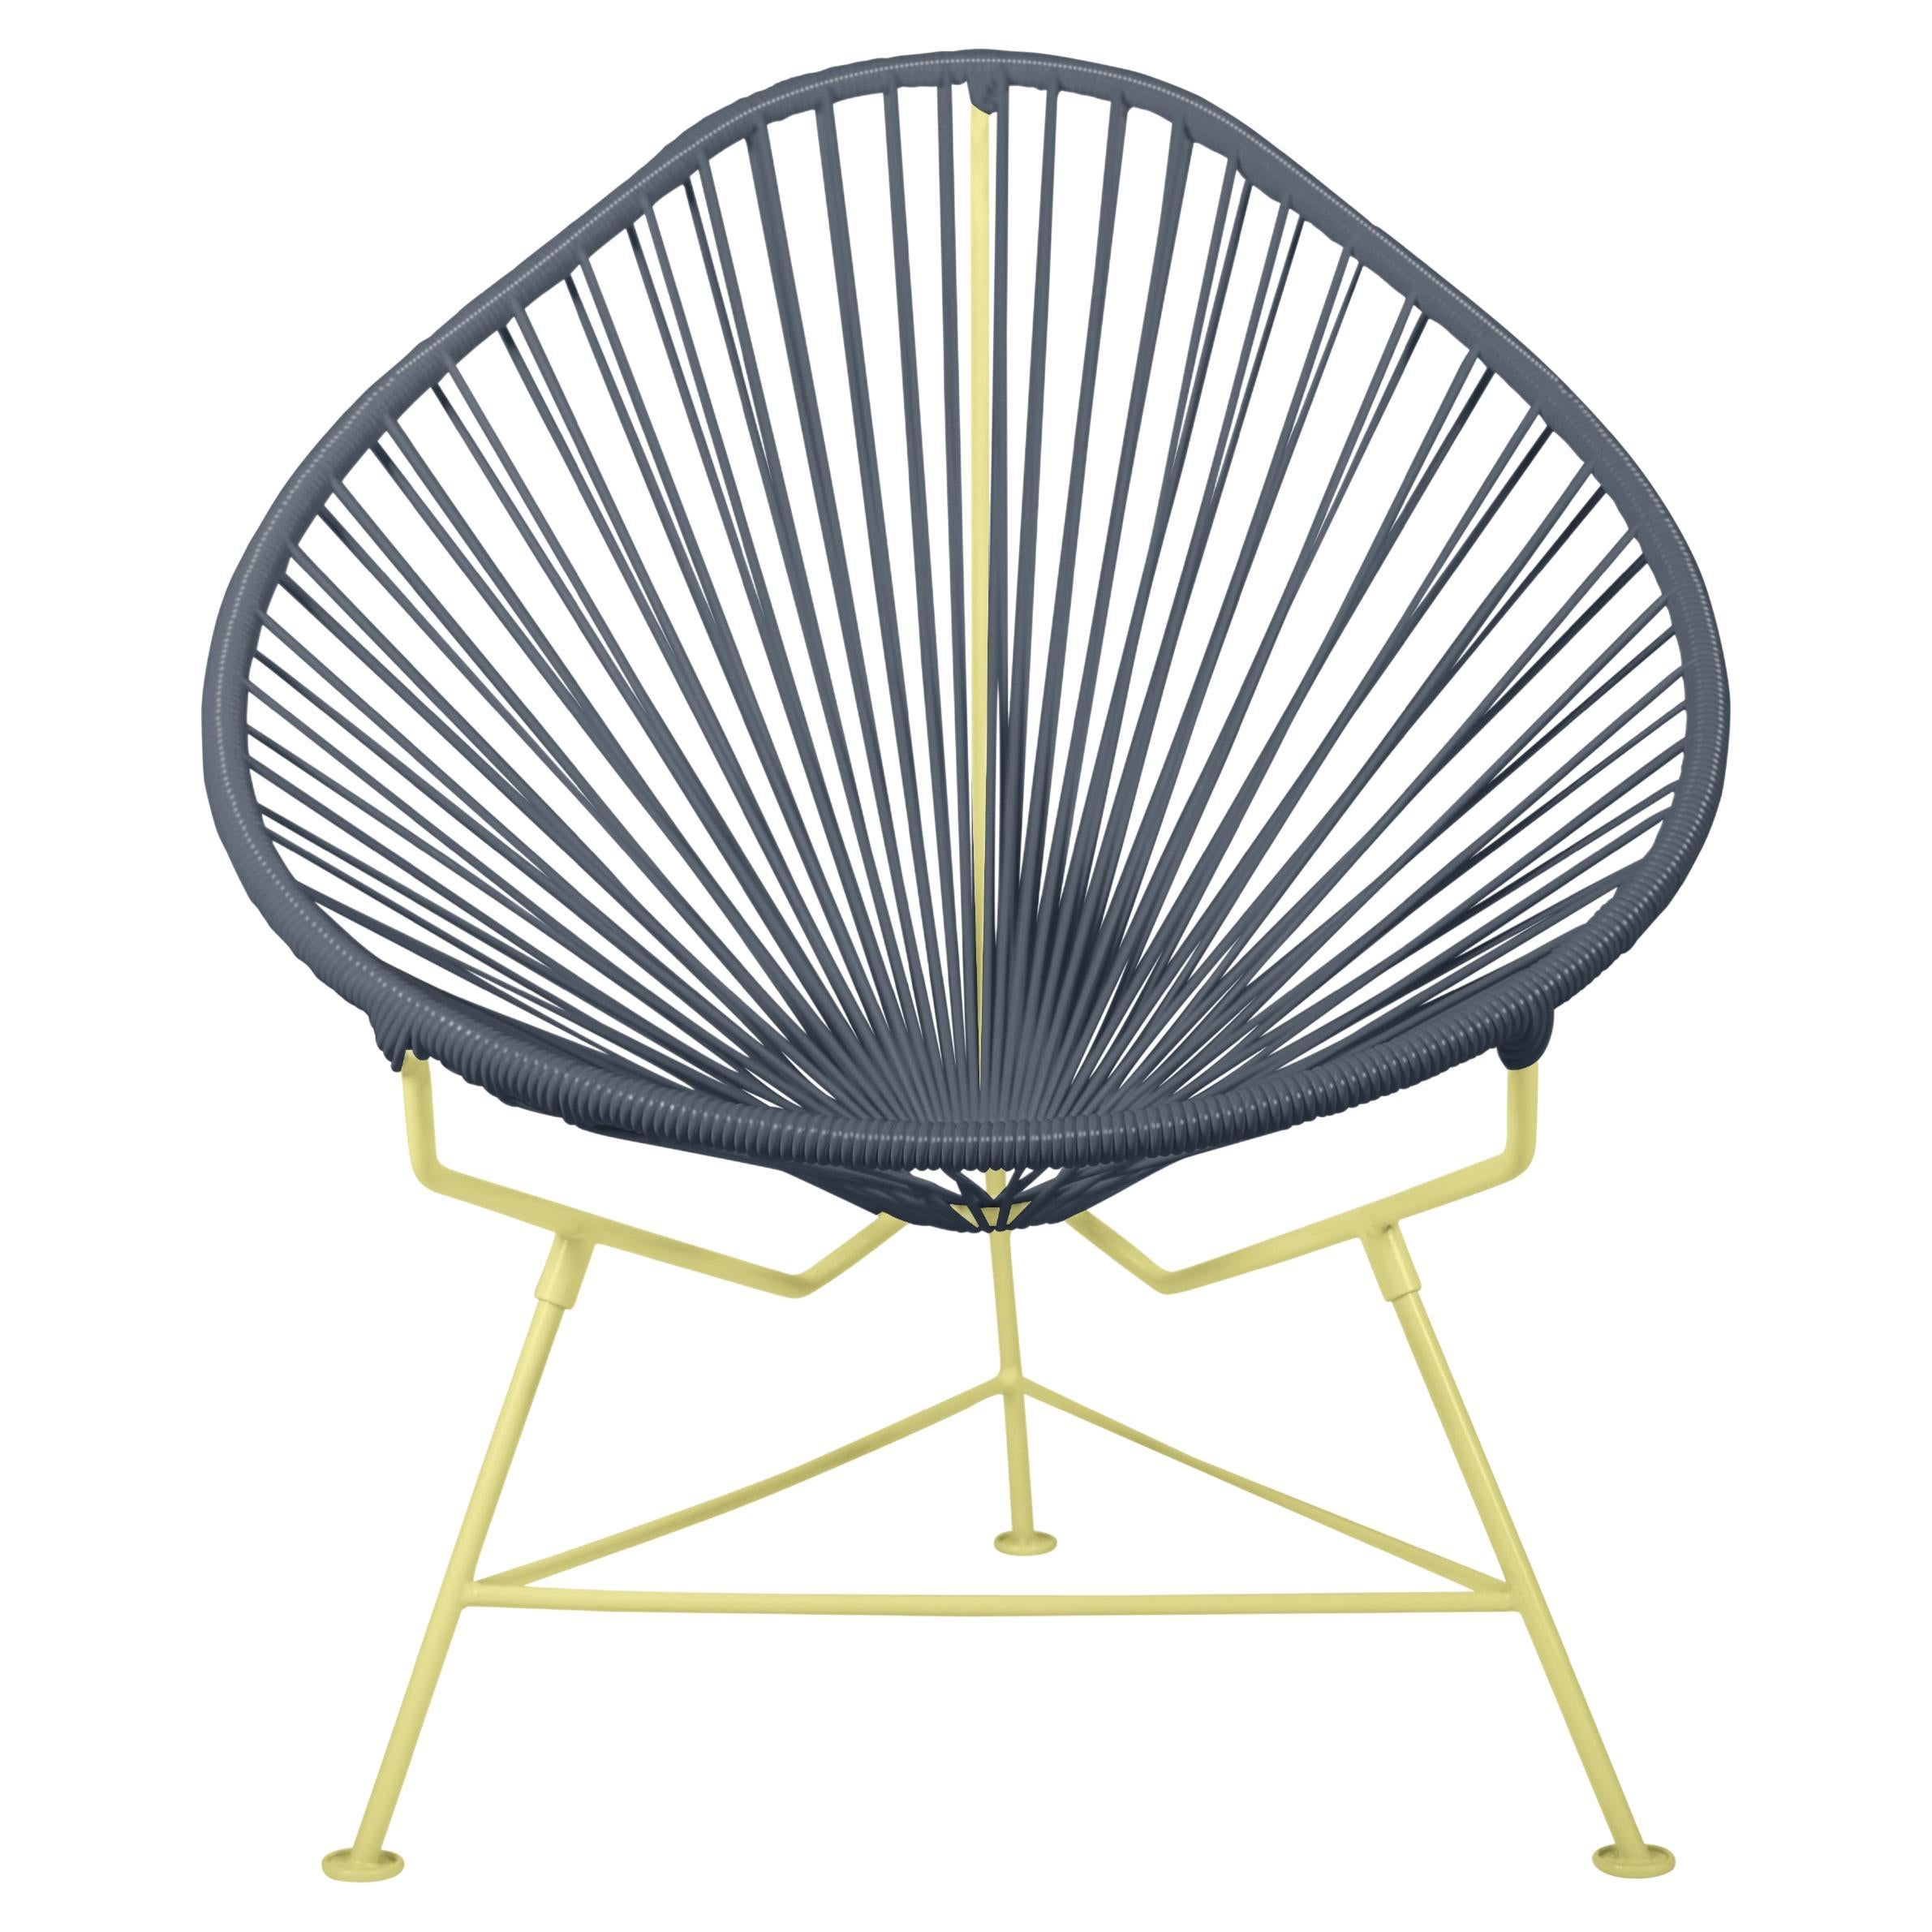 Innit Designs Acapulco Chair Grey Weave on Yellow Frame For Sale